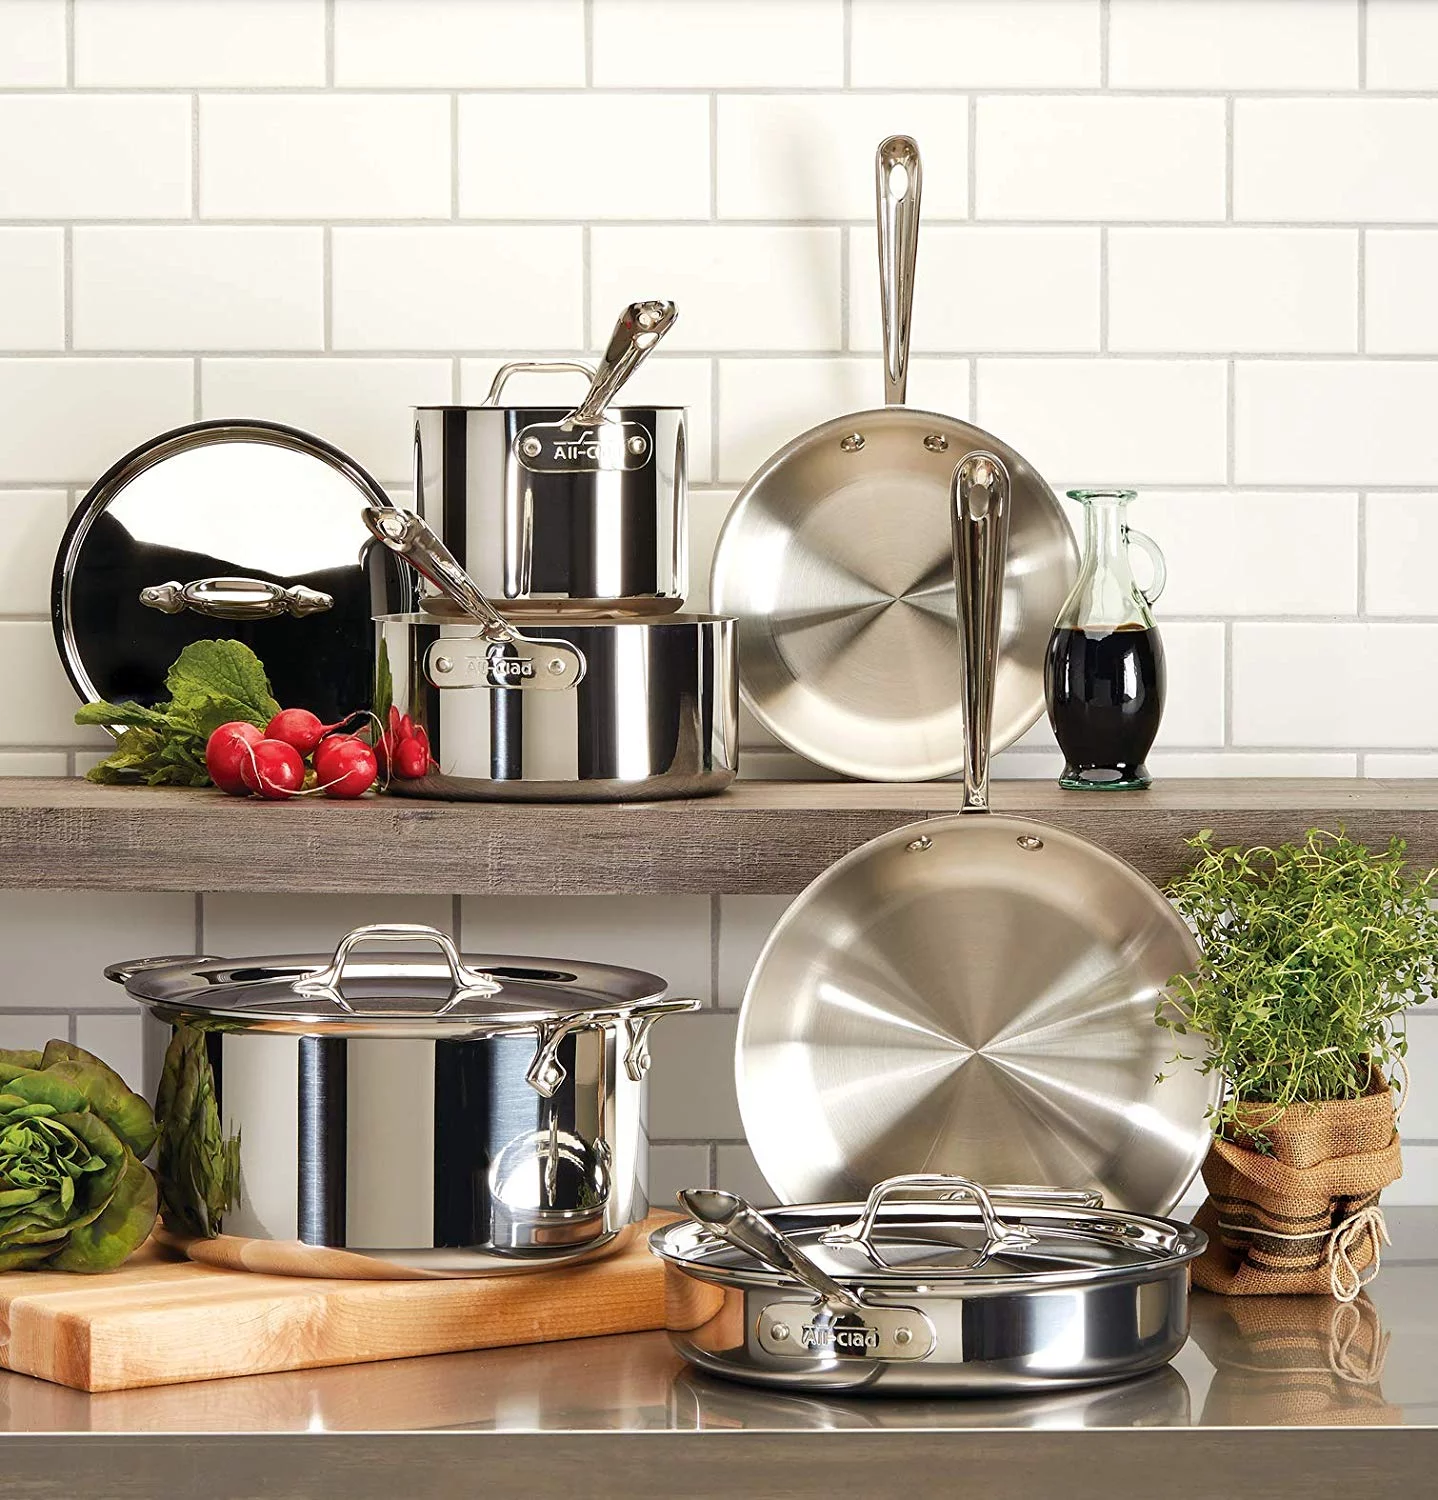 Top 3 Websites for Kitchenware, Tableware, and Home Decor Shopping